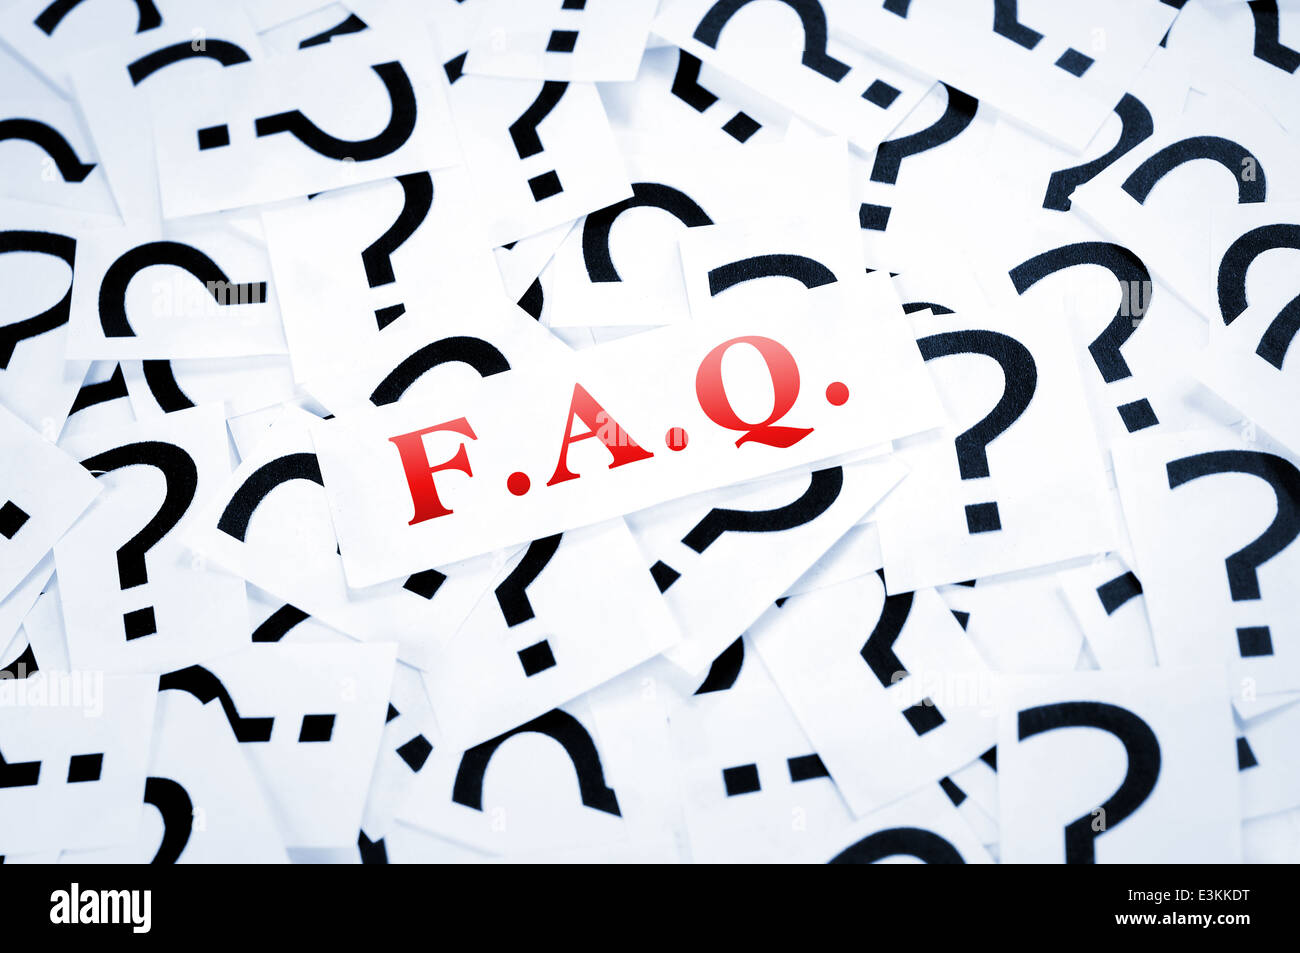 FAQ word on question mark background Stock Photo